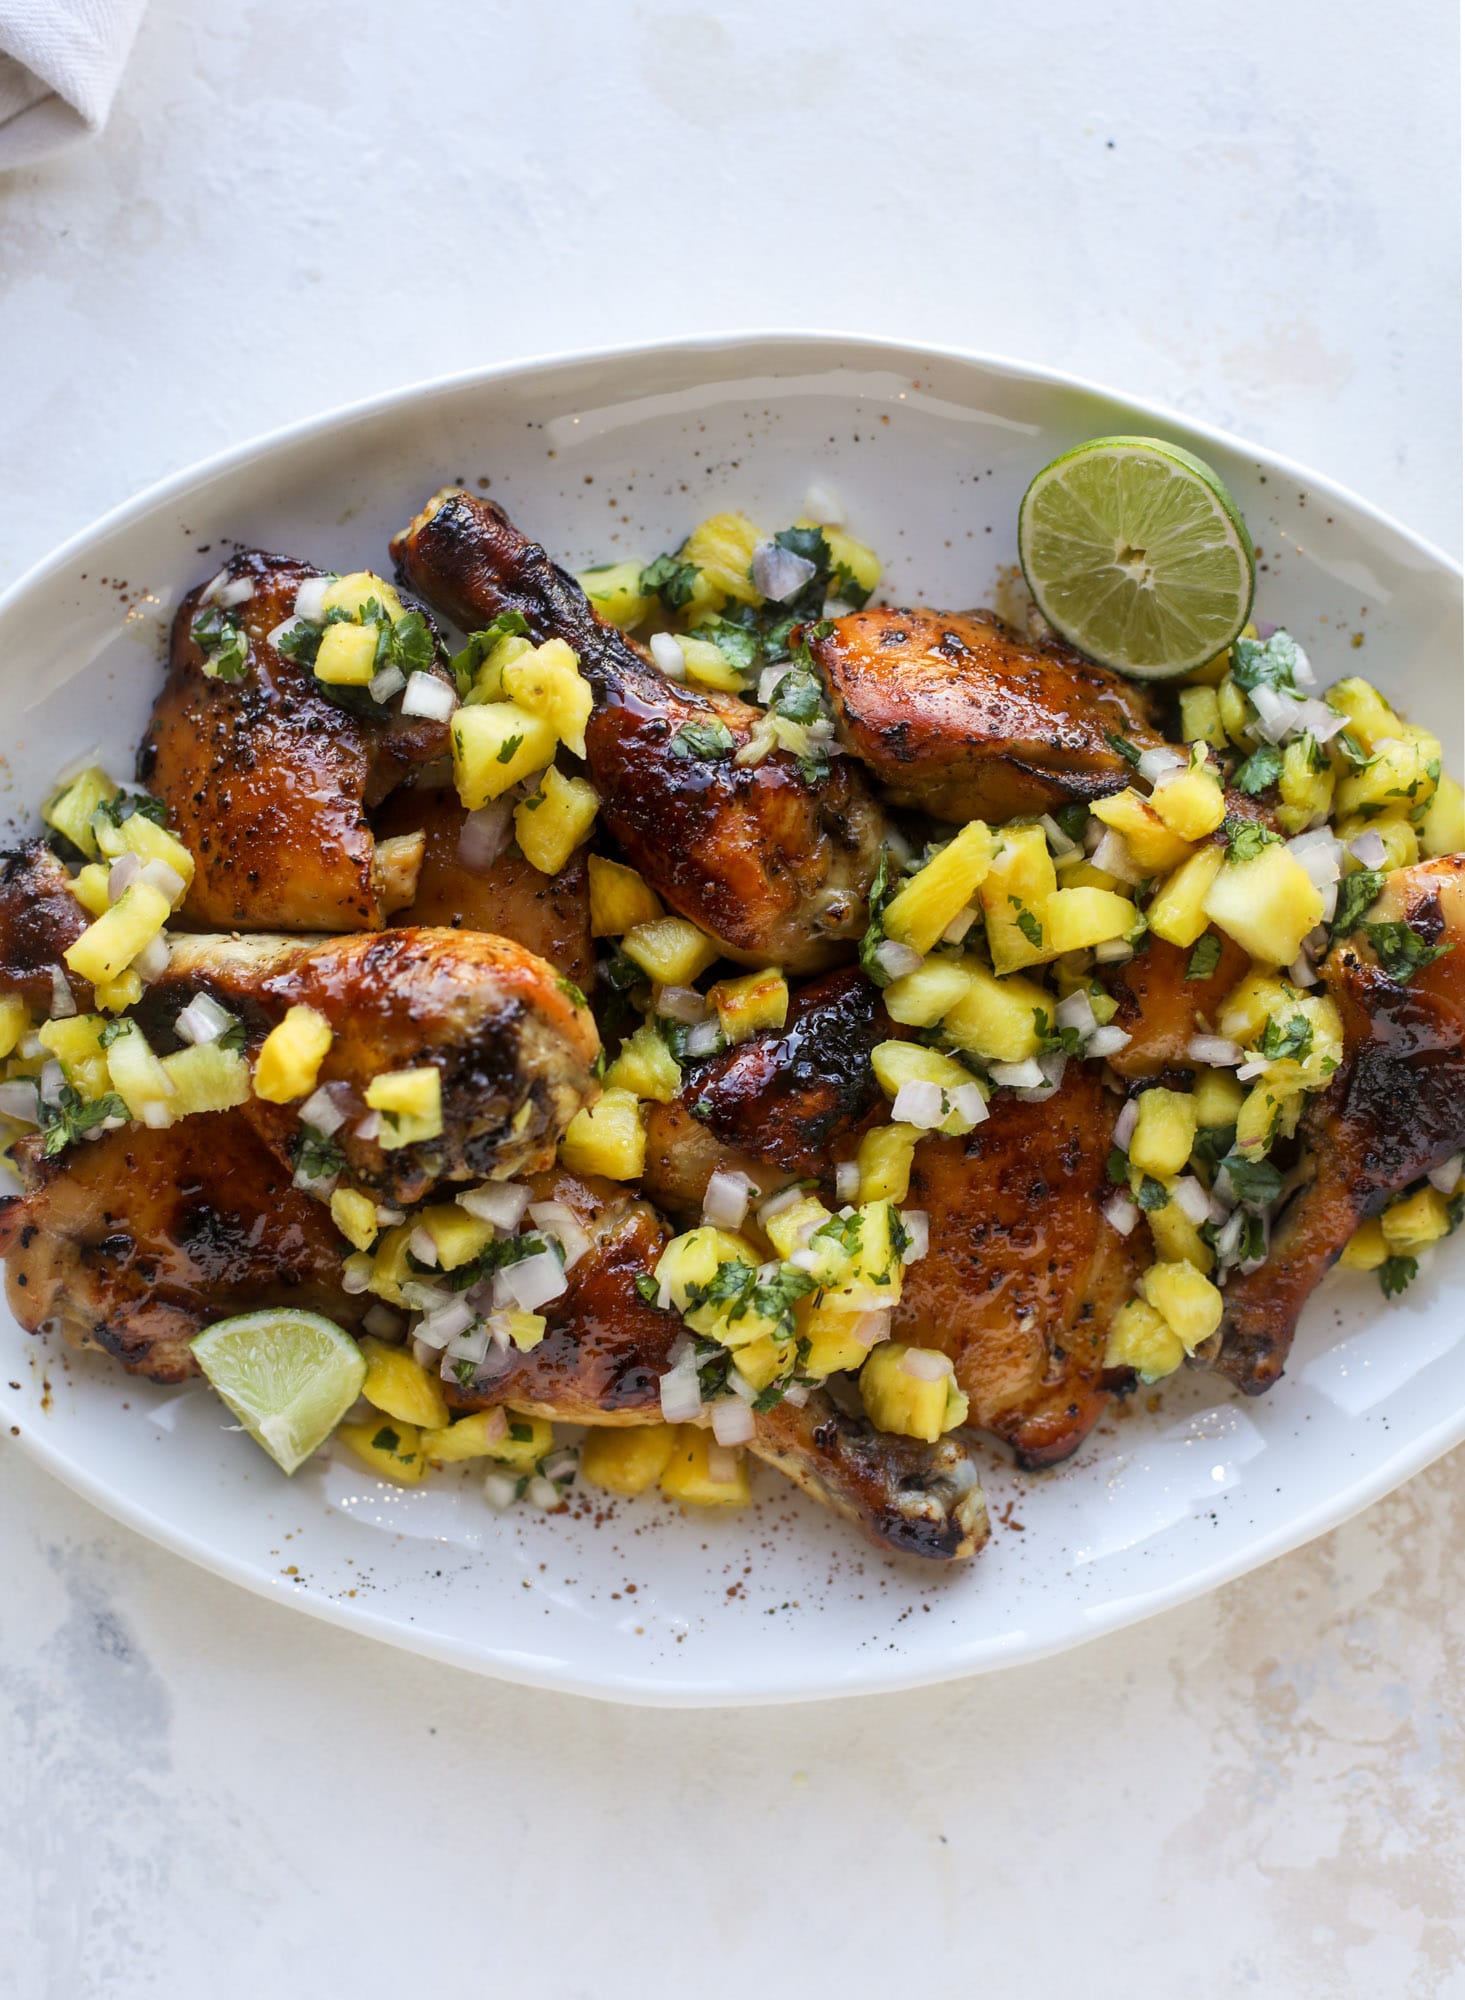 This sticky chicken recipe is made on a sheet pan and roasted until flavorfor and sticky with sauce, then served with pineapple salsa. It's the best! I howsweeteats.com #sticky #chicken